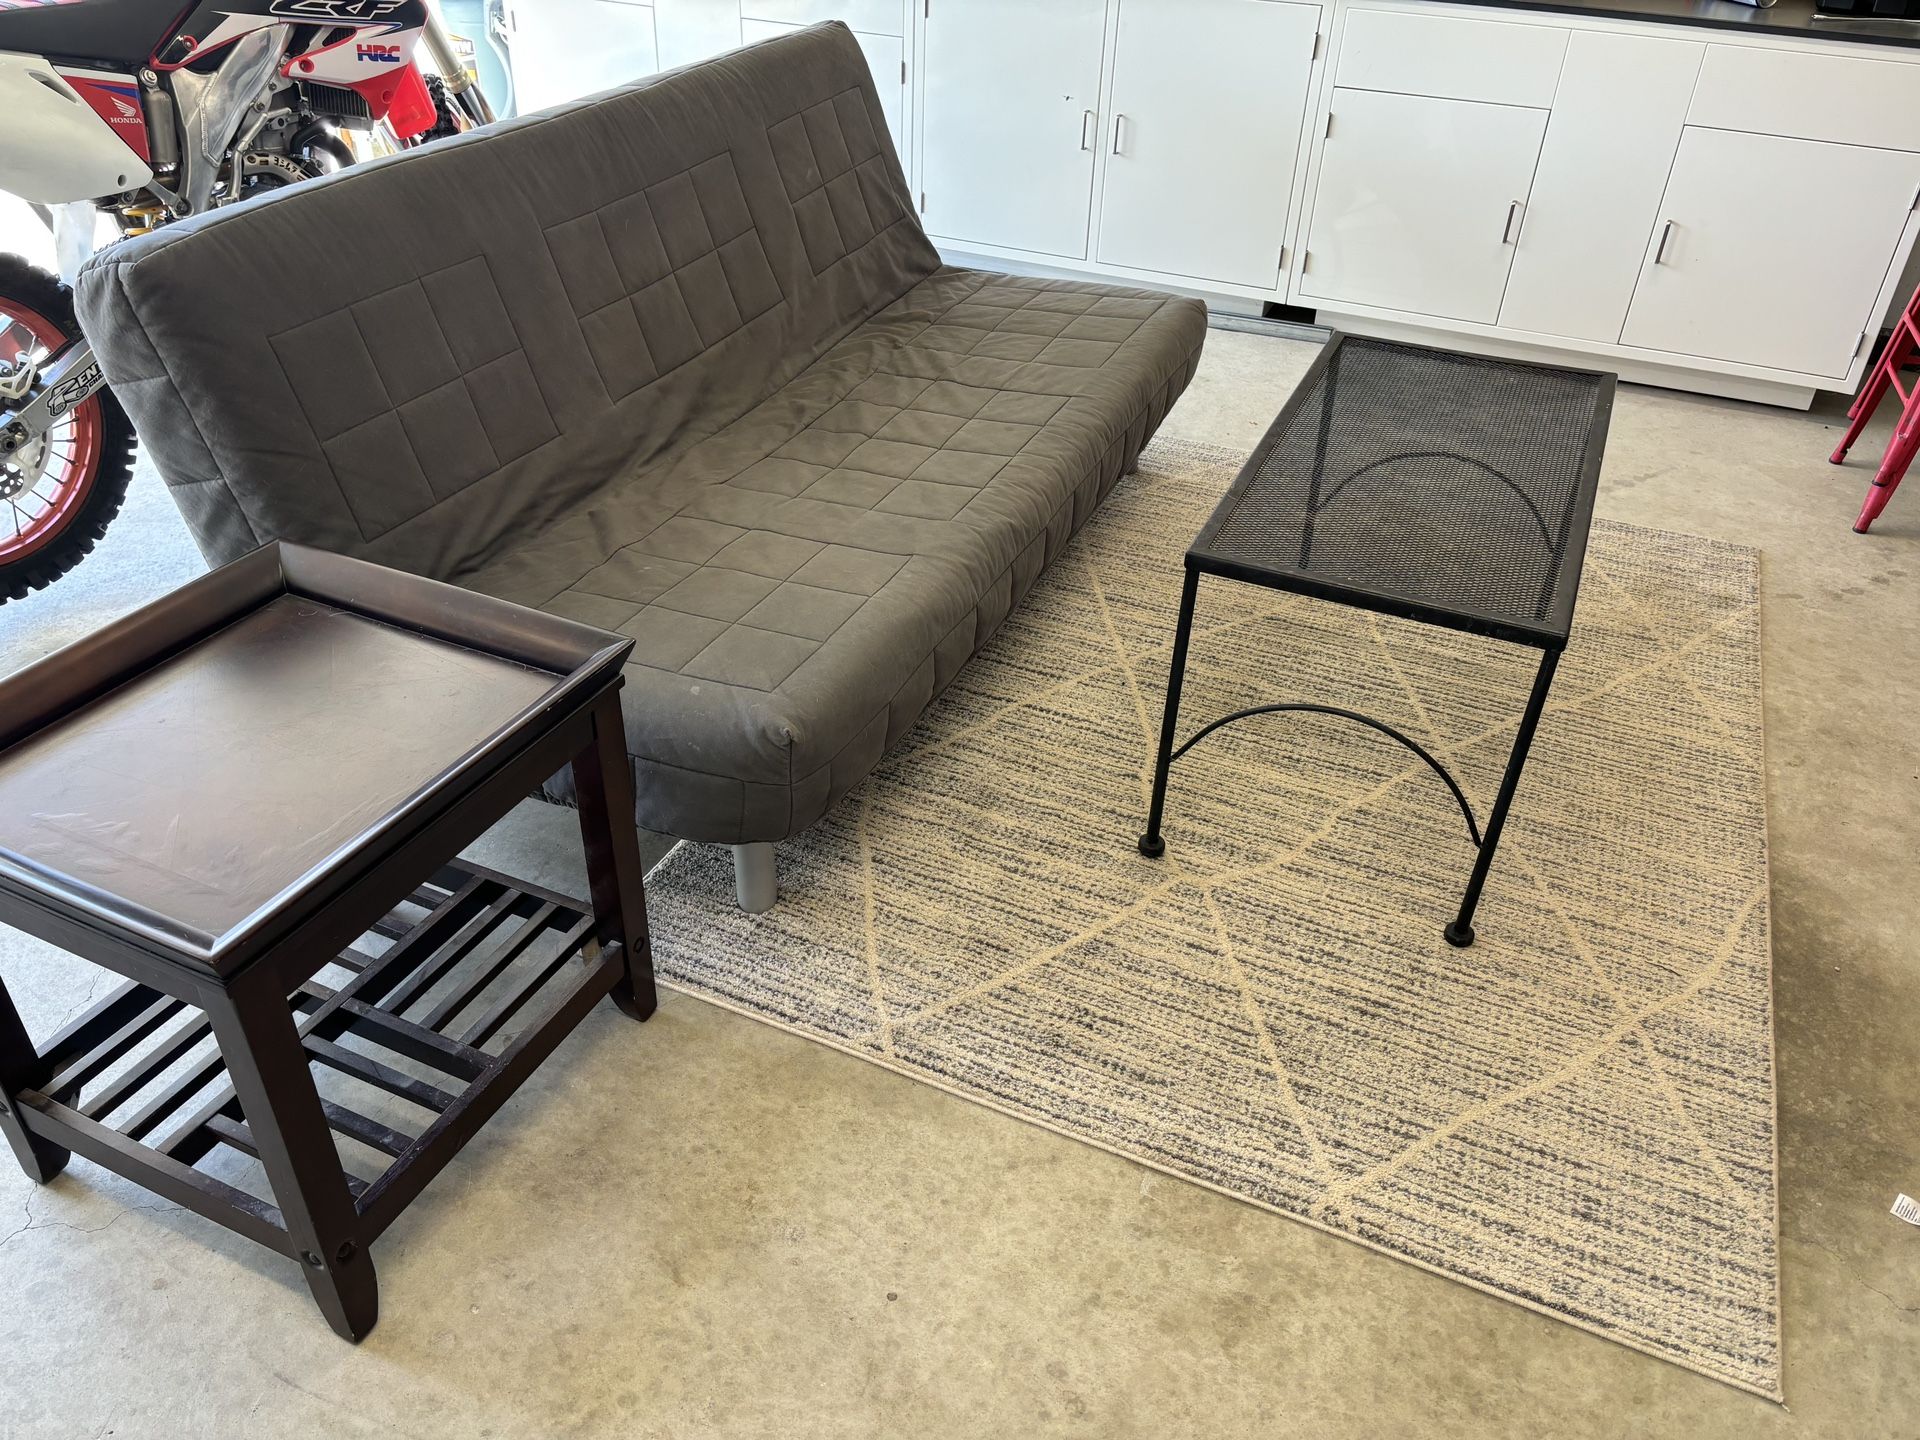 Futon + Side Table + Wire Coffee Table